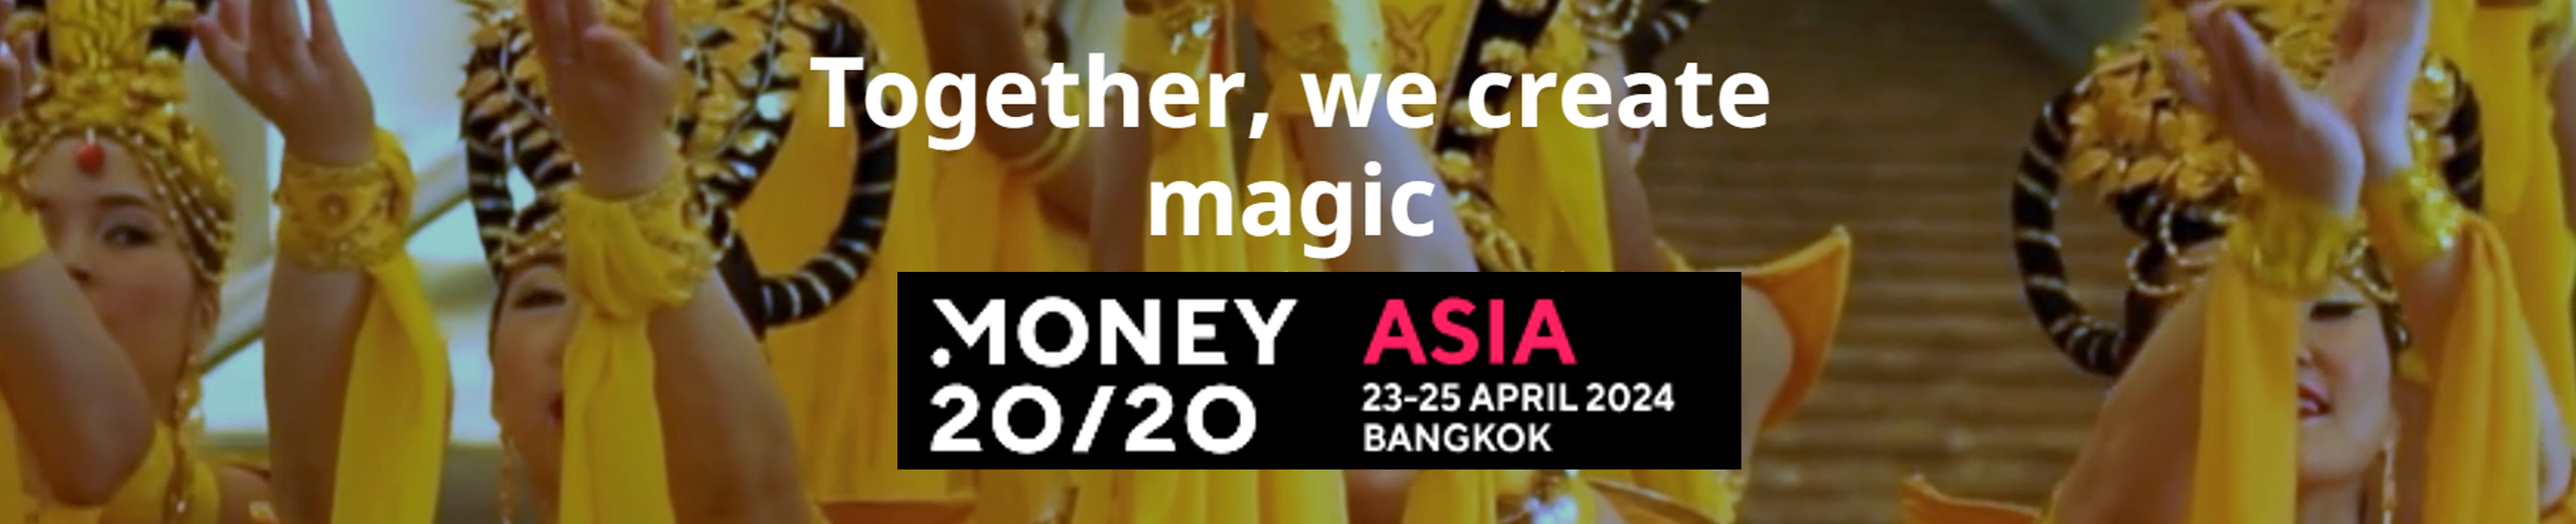 Traditional thai performance showcased at the money 20/20 asia event in bangkok, april 2024.